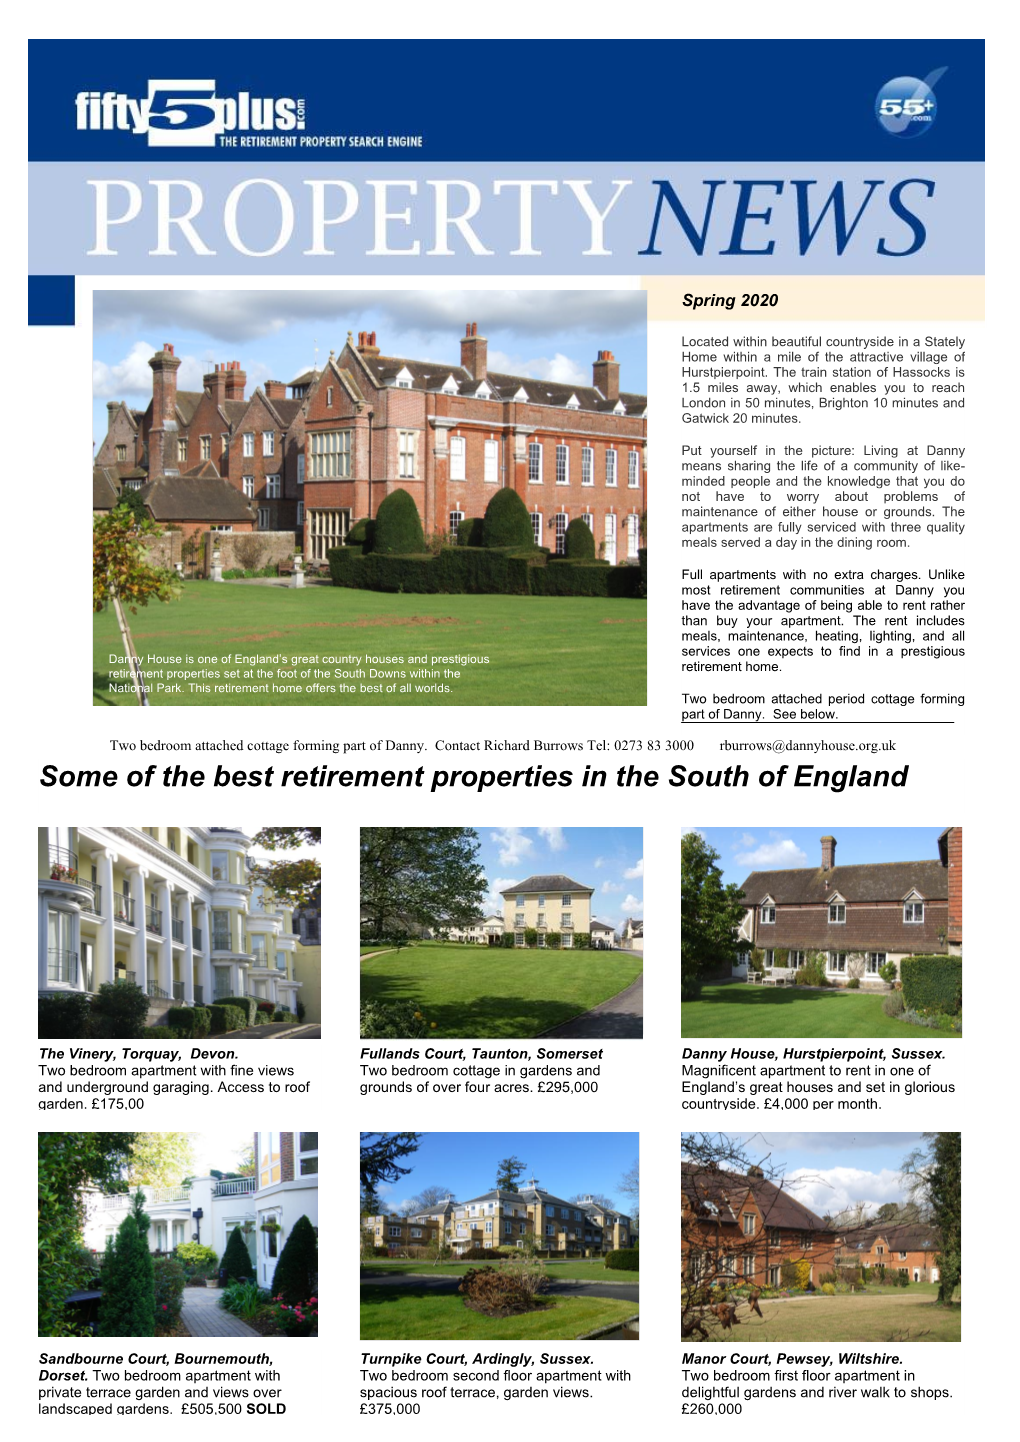 Some of the Best Retirement Properties in the South of England